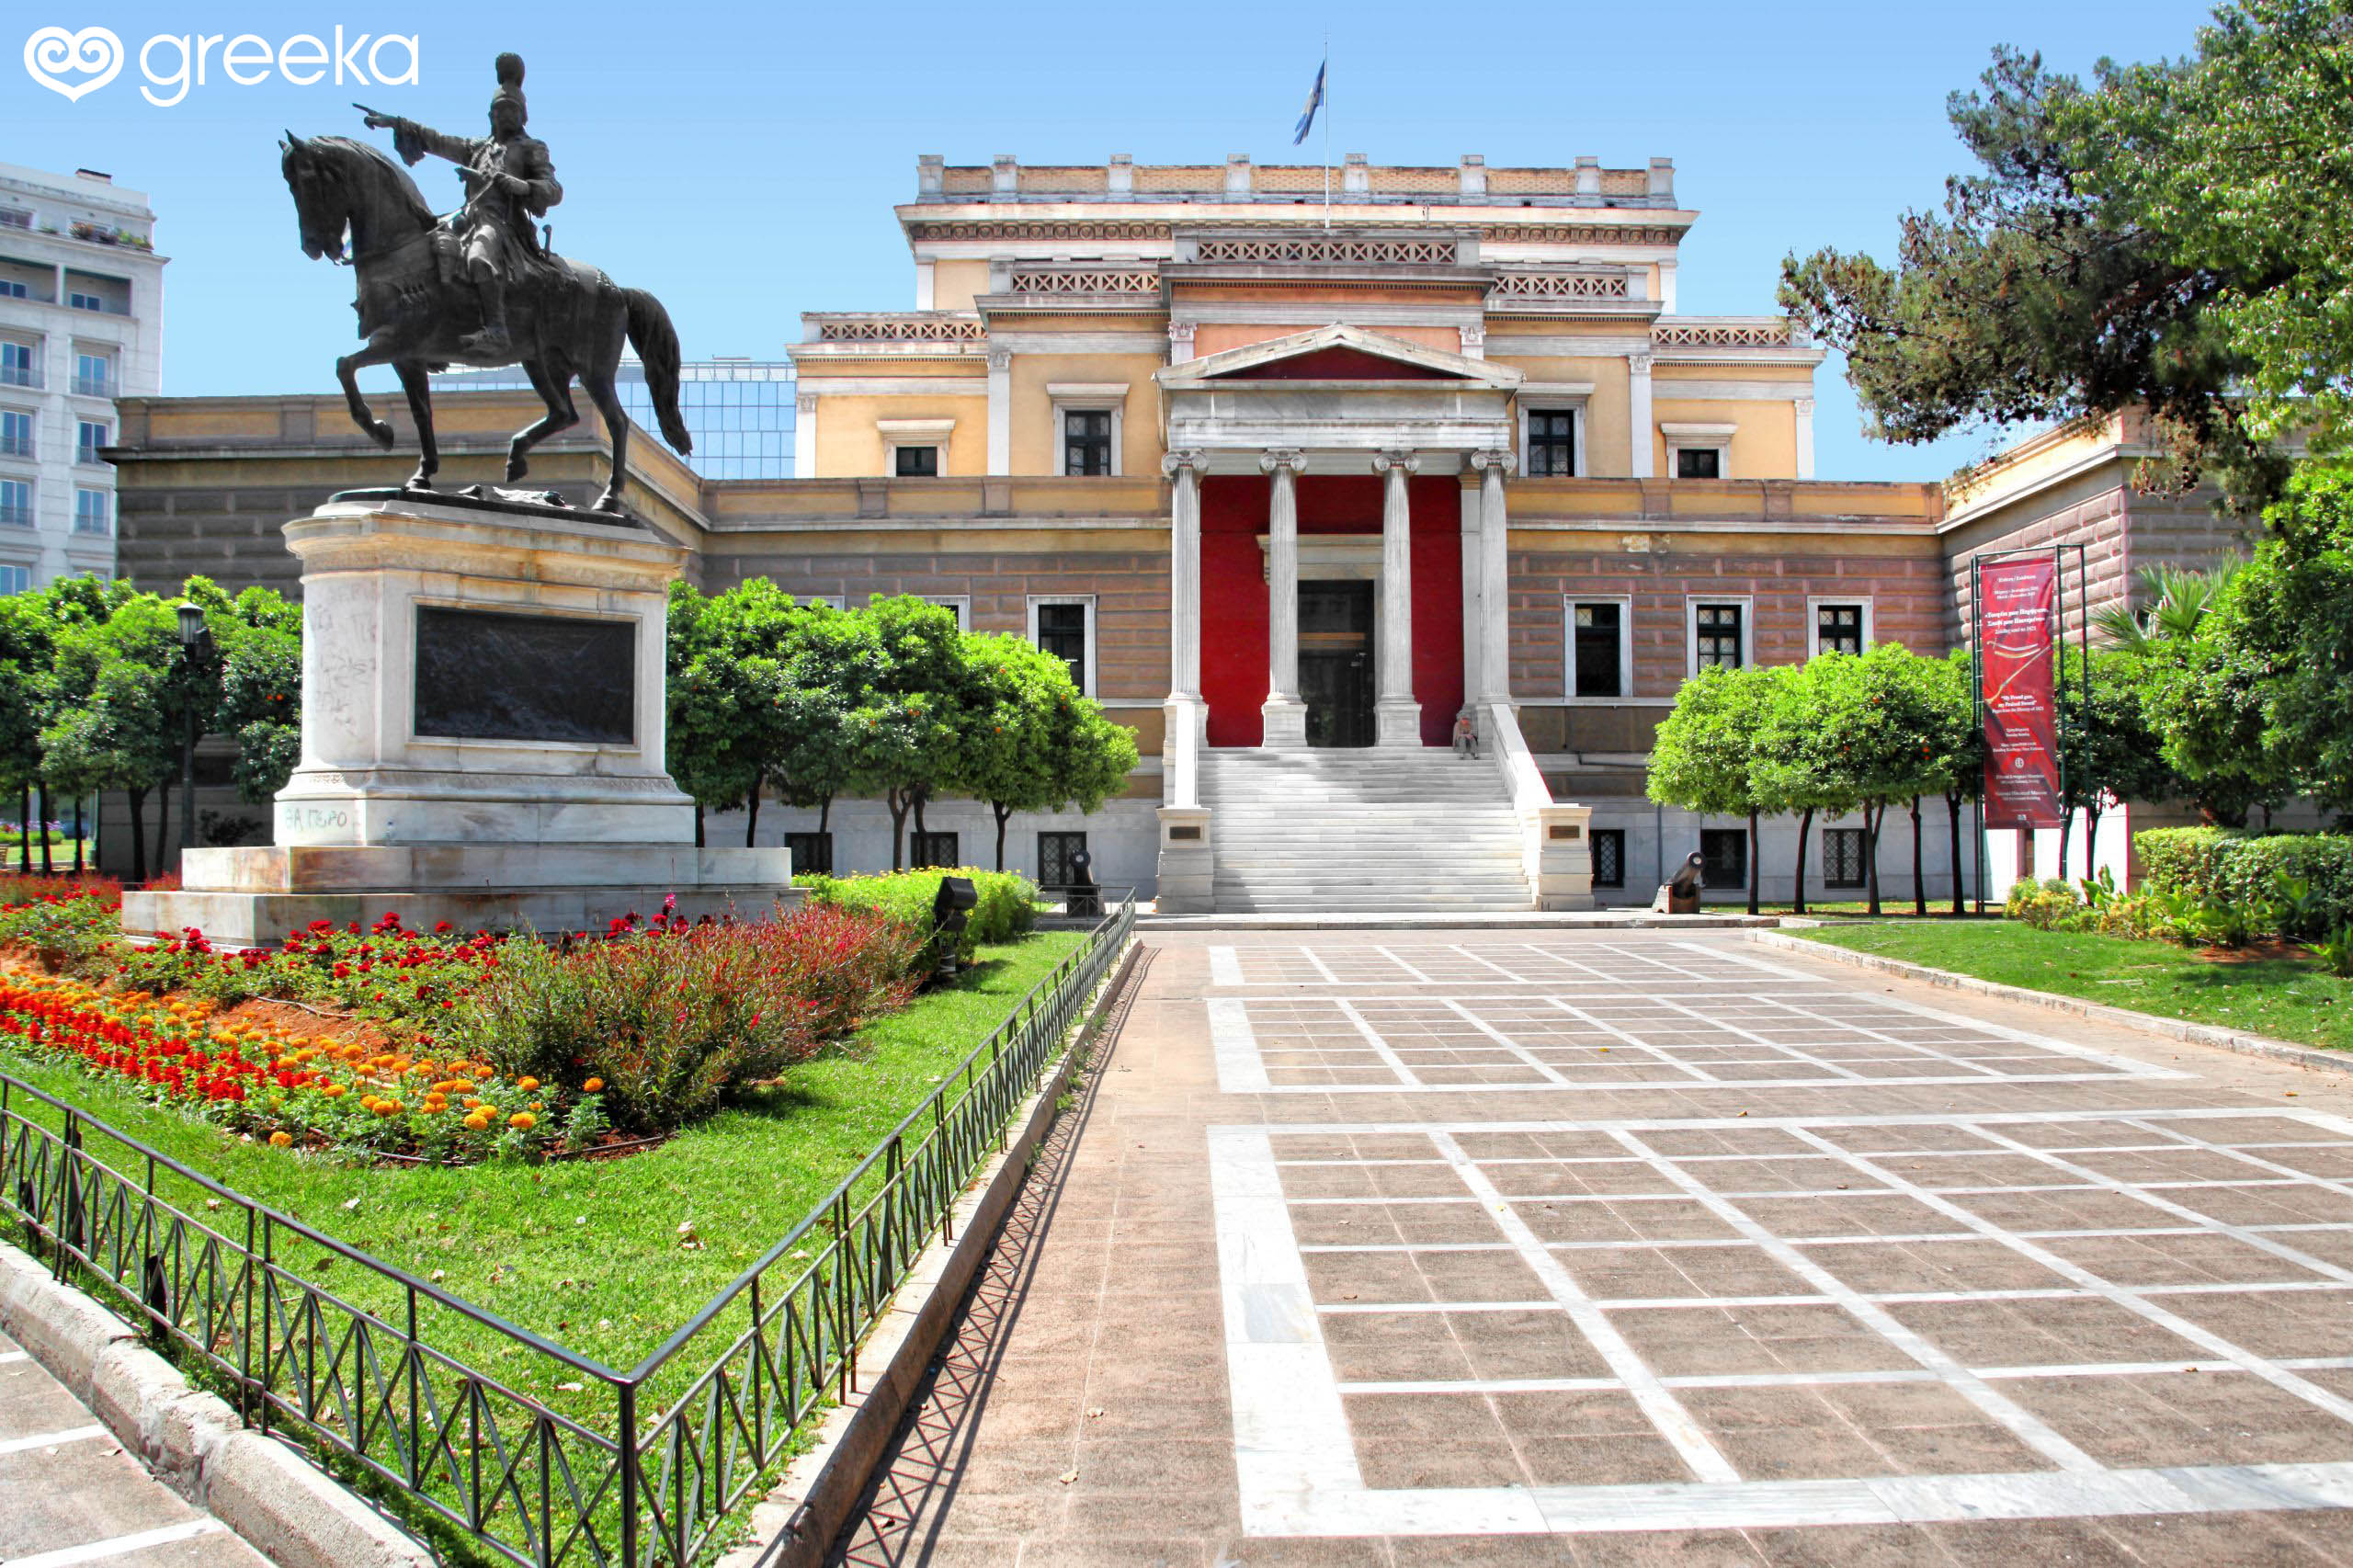 museums to visit in athens